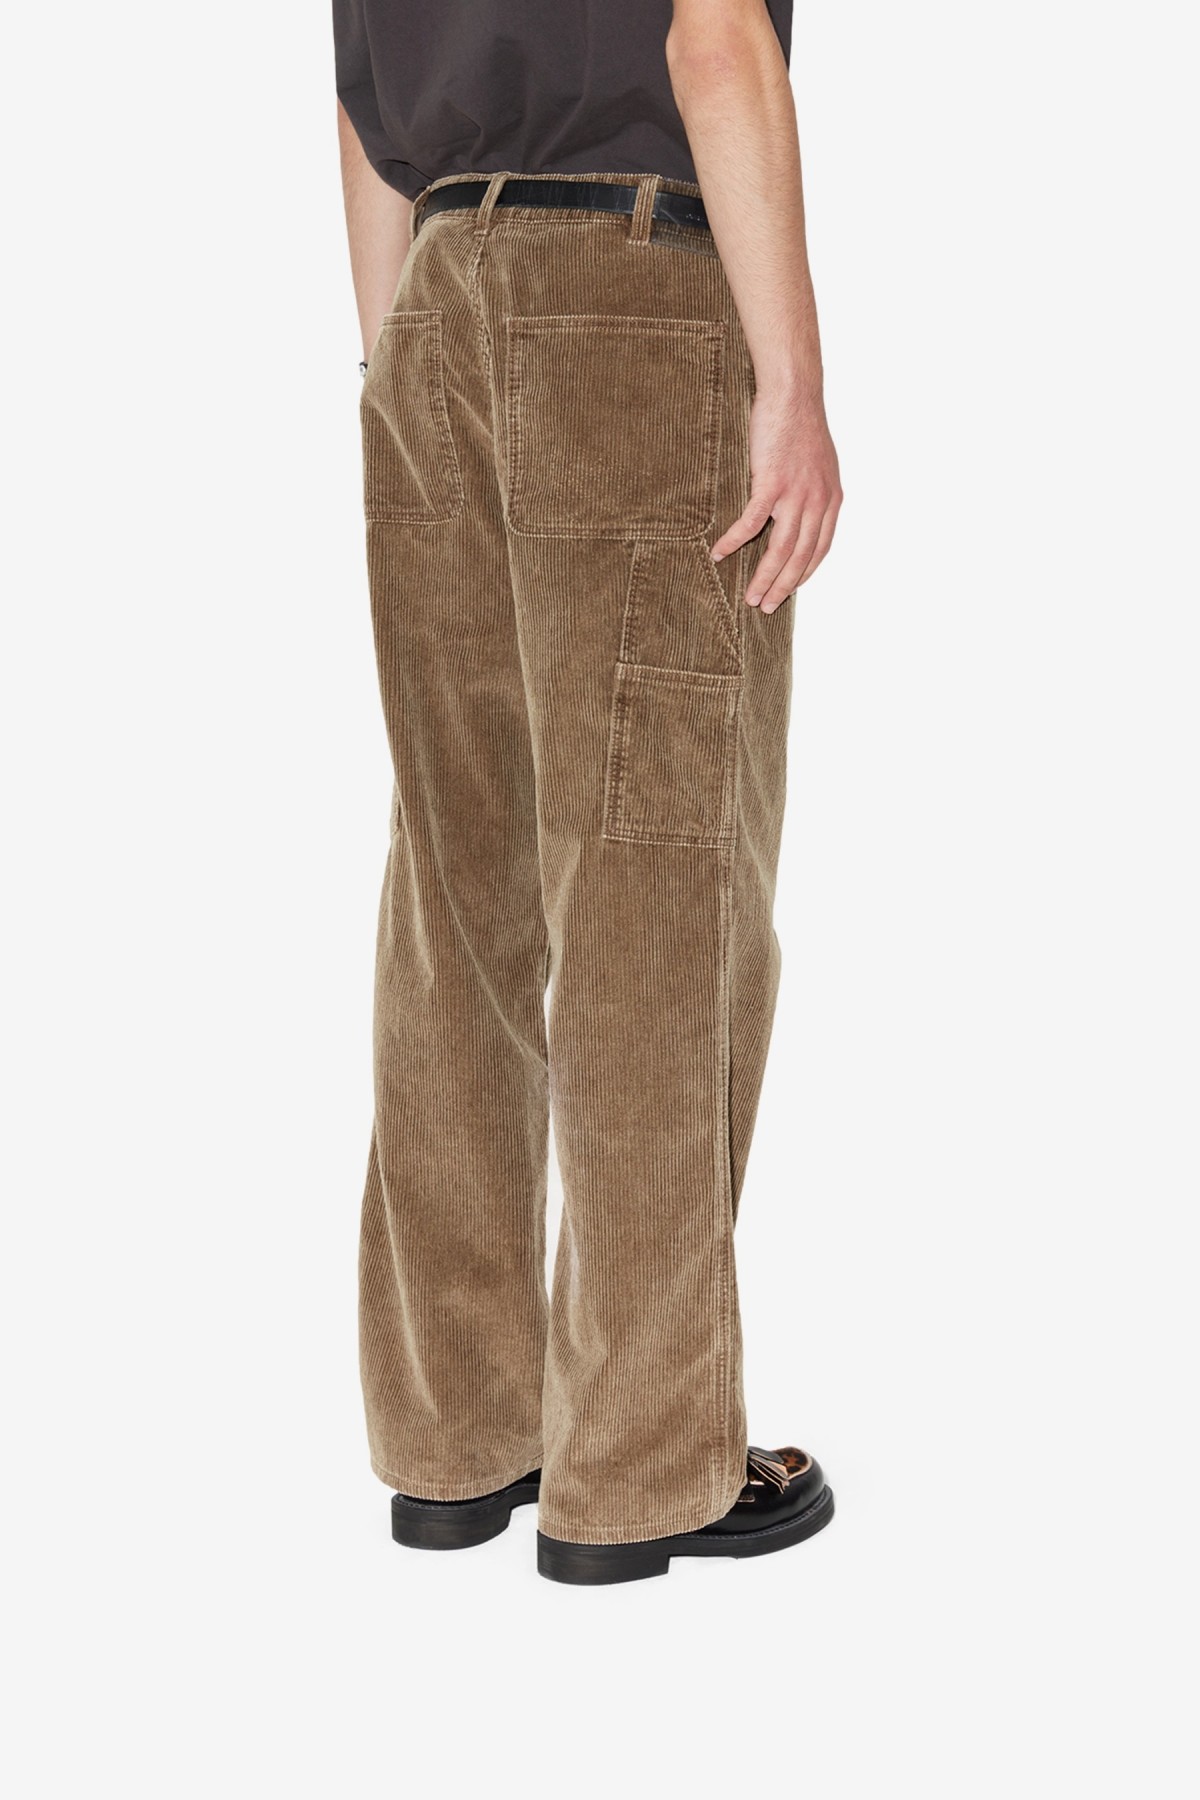 Our Legacy Joiner Trouser in Brown Enzyme Cord